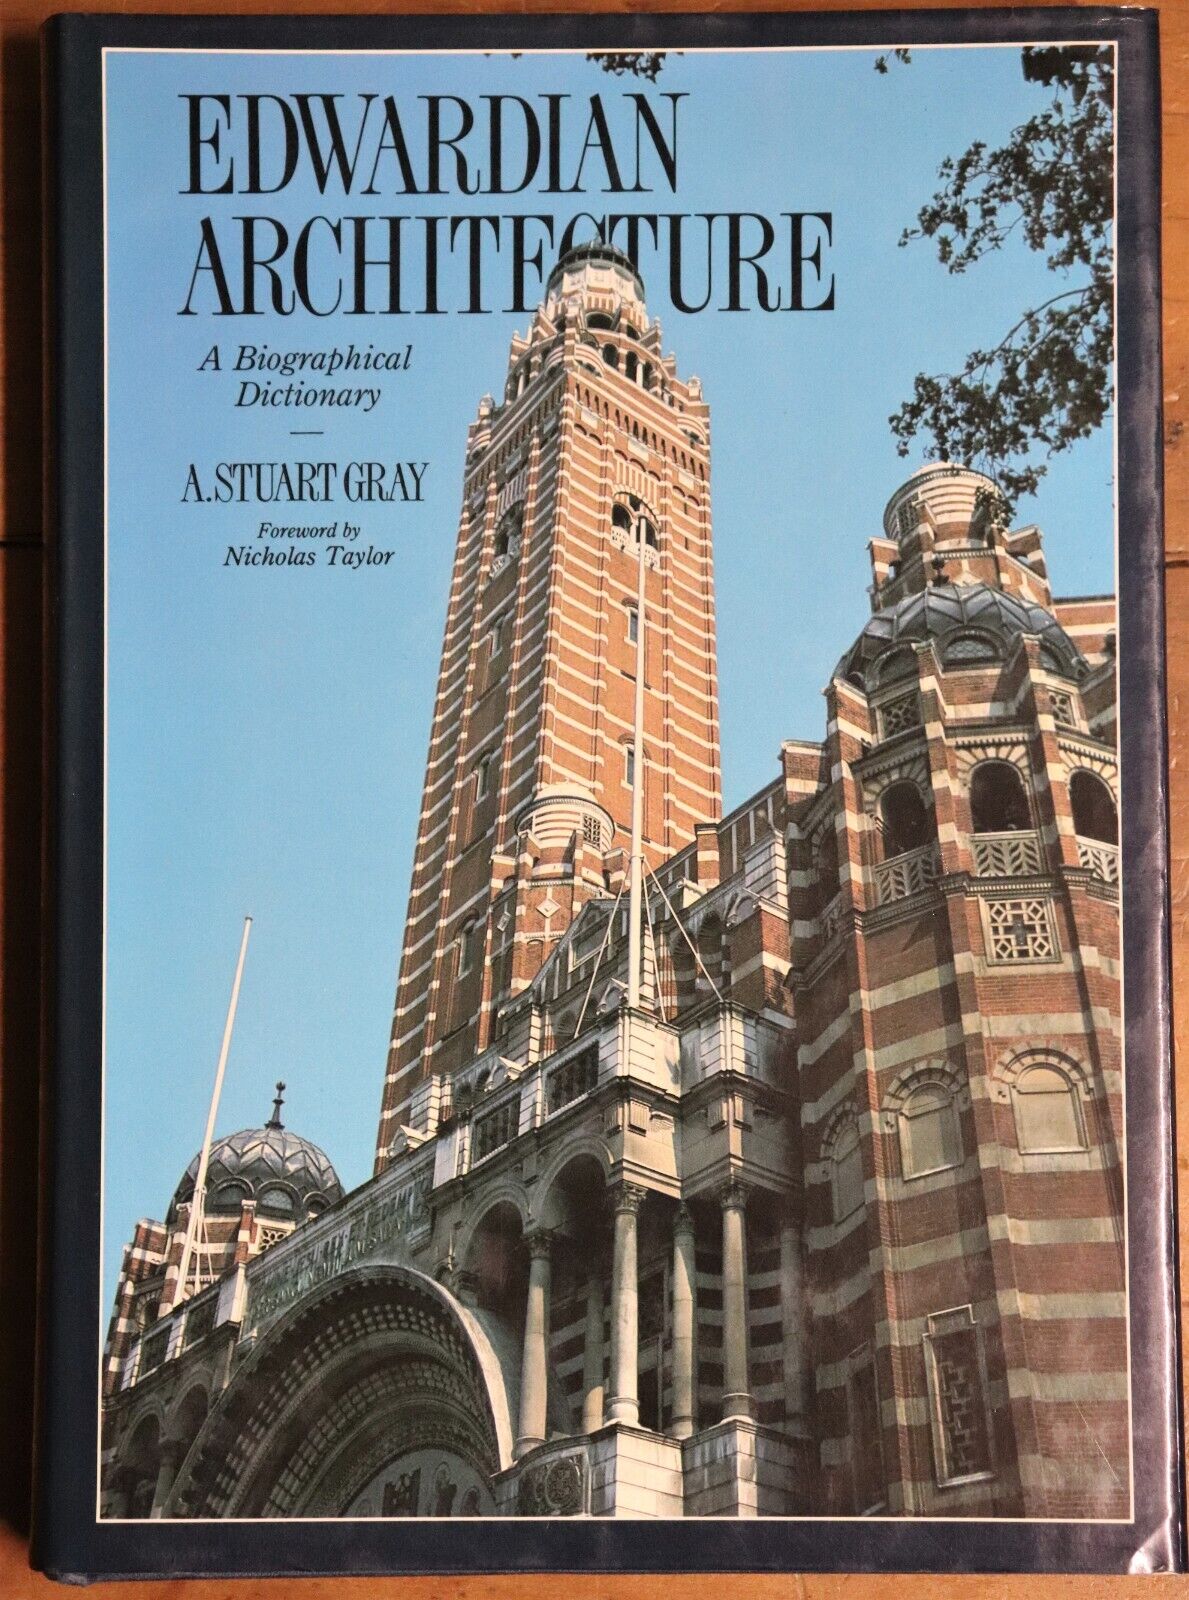 Edwardian Architecture: A Biographical Dictionary - 1988 - Reference Book